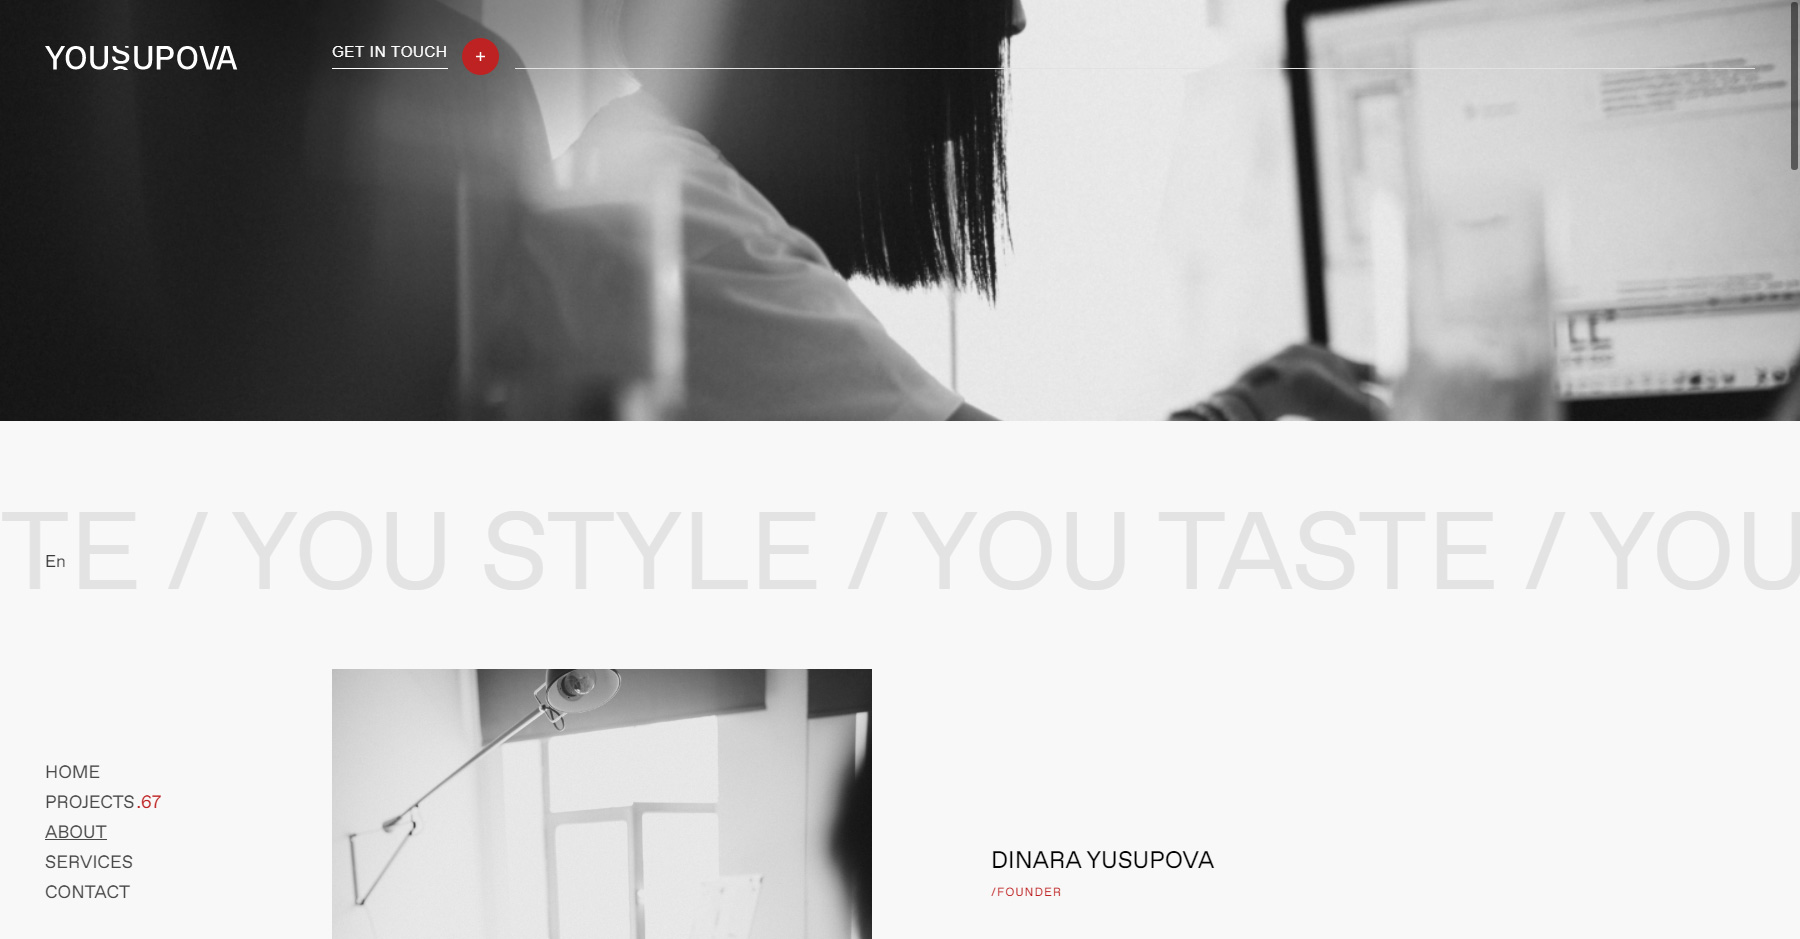 YOUSUPOVA - Website of the Day